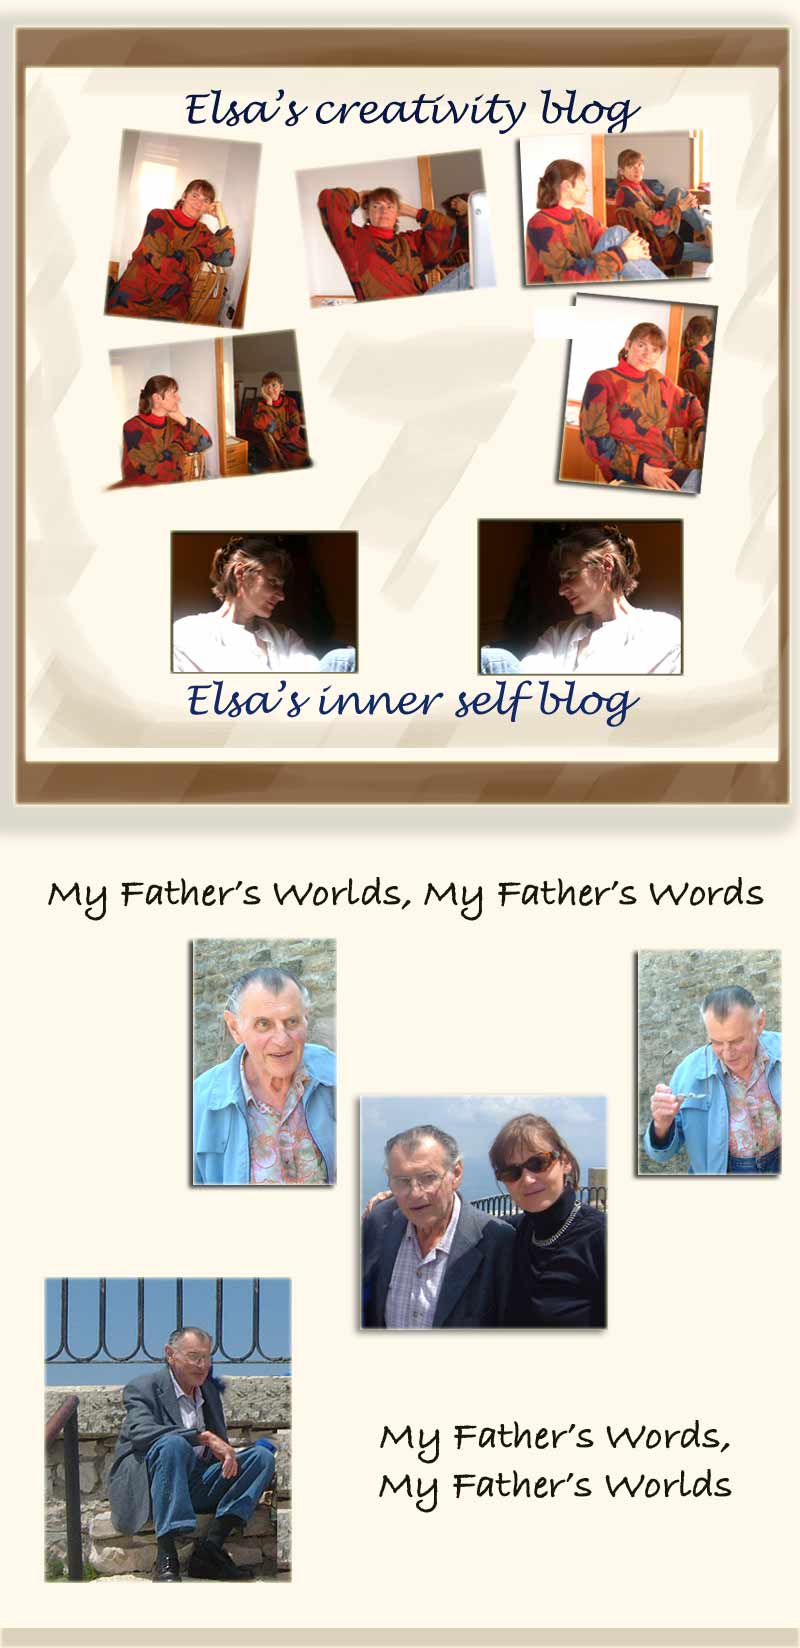 large pictures - blogs and my father's worlds, my father's words